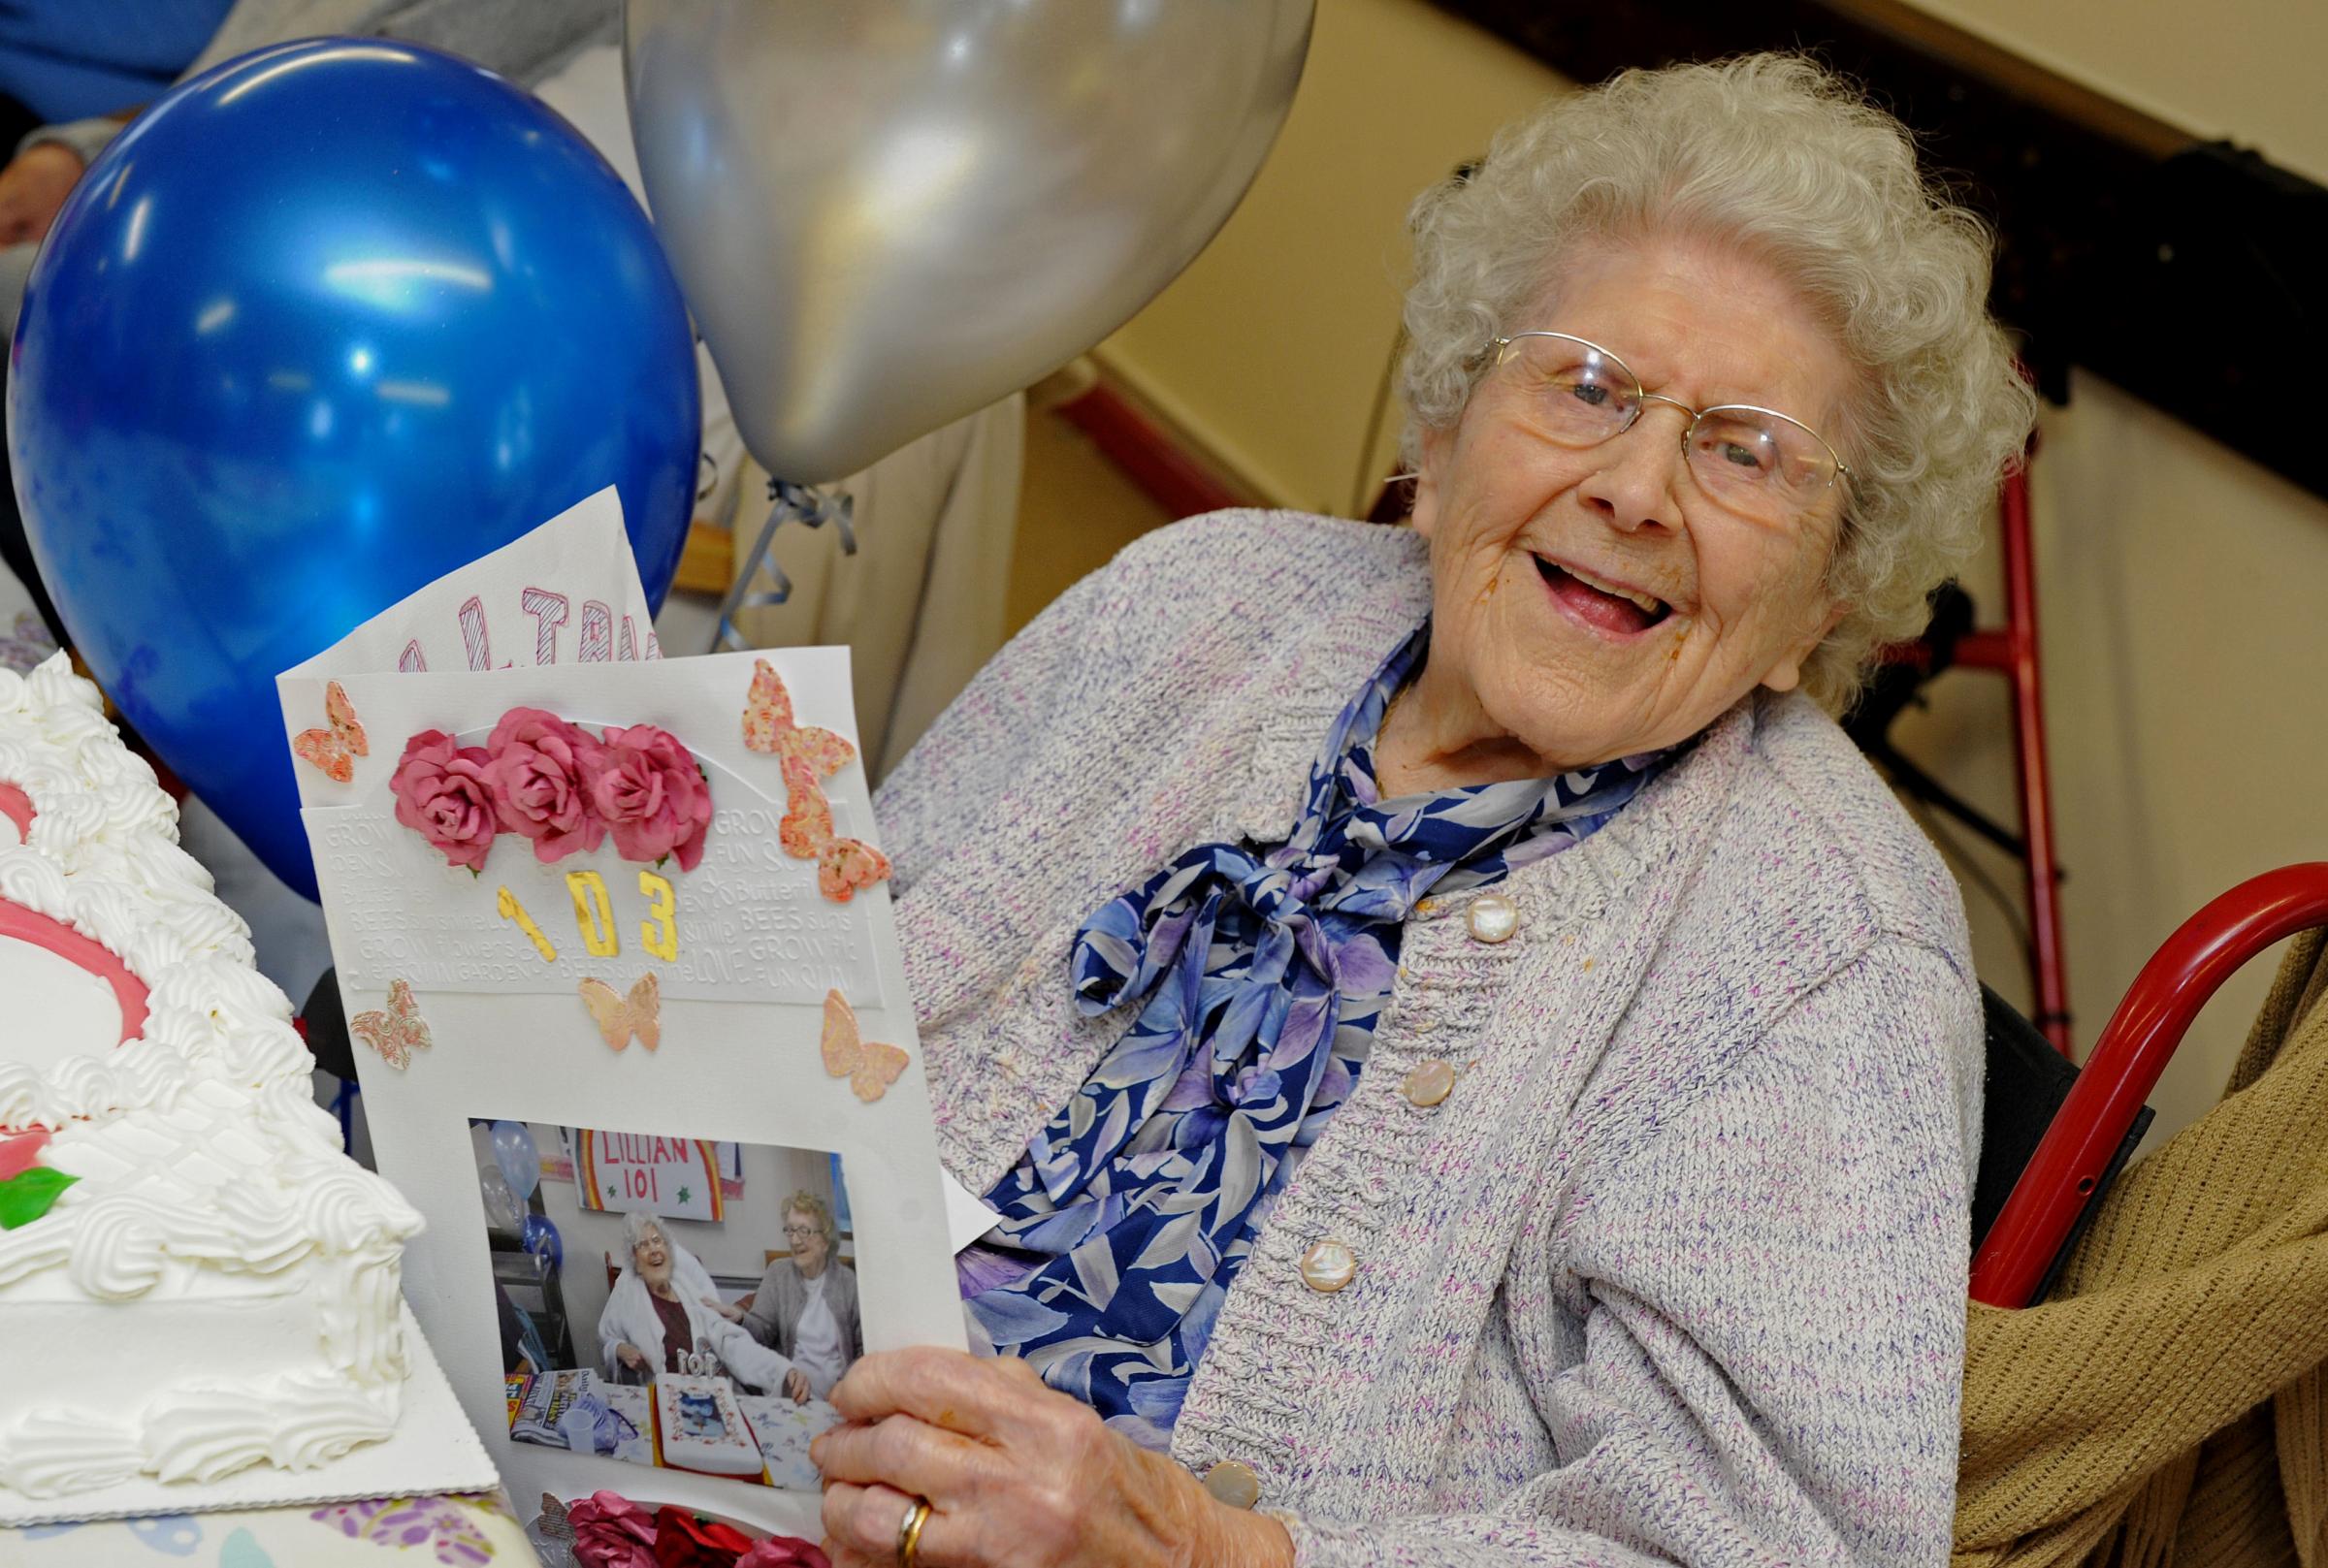 Eating is secret to a long life for 103-year-old